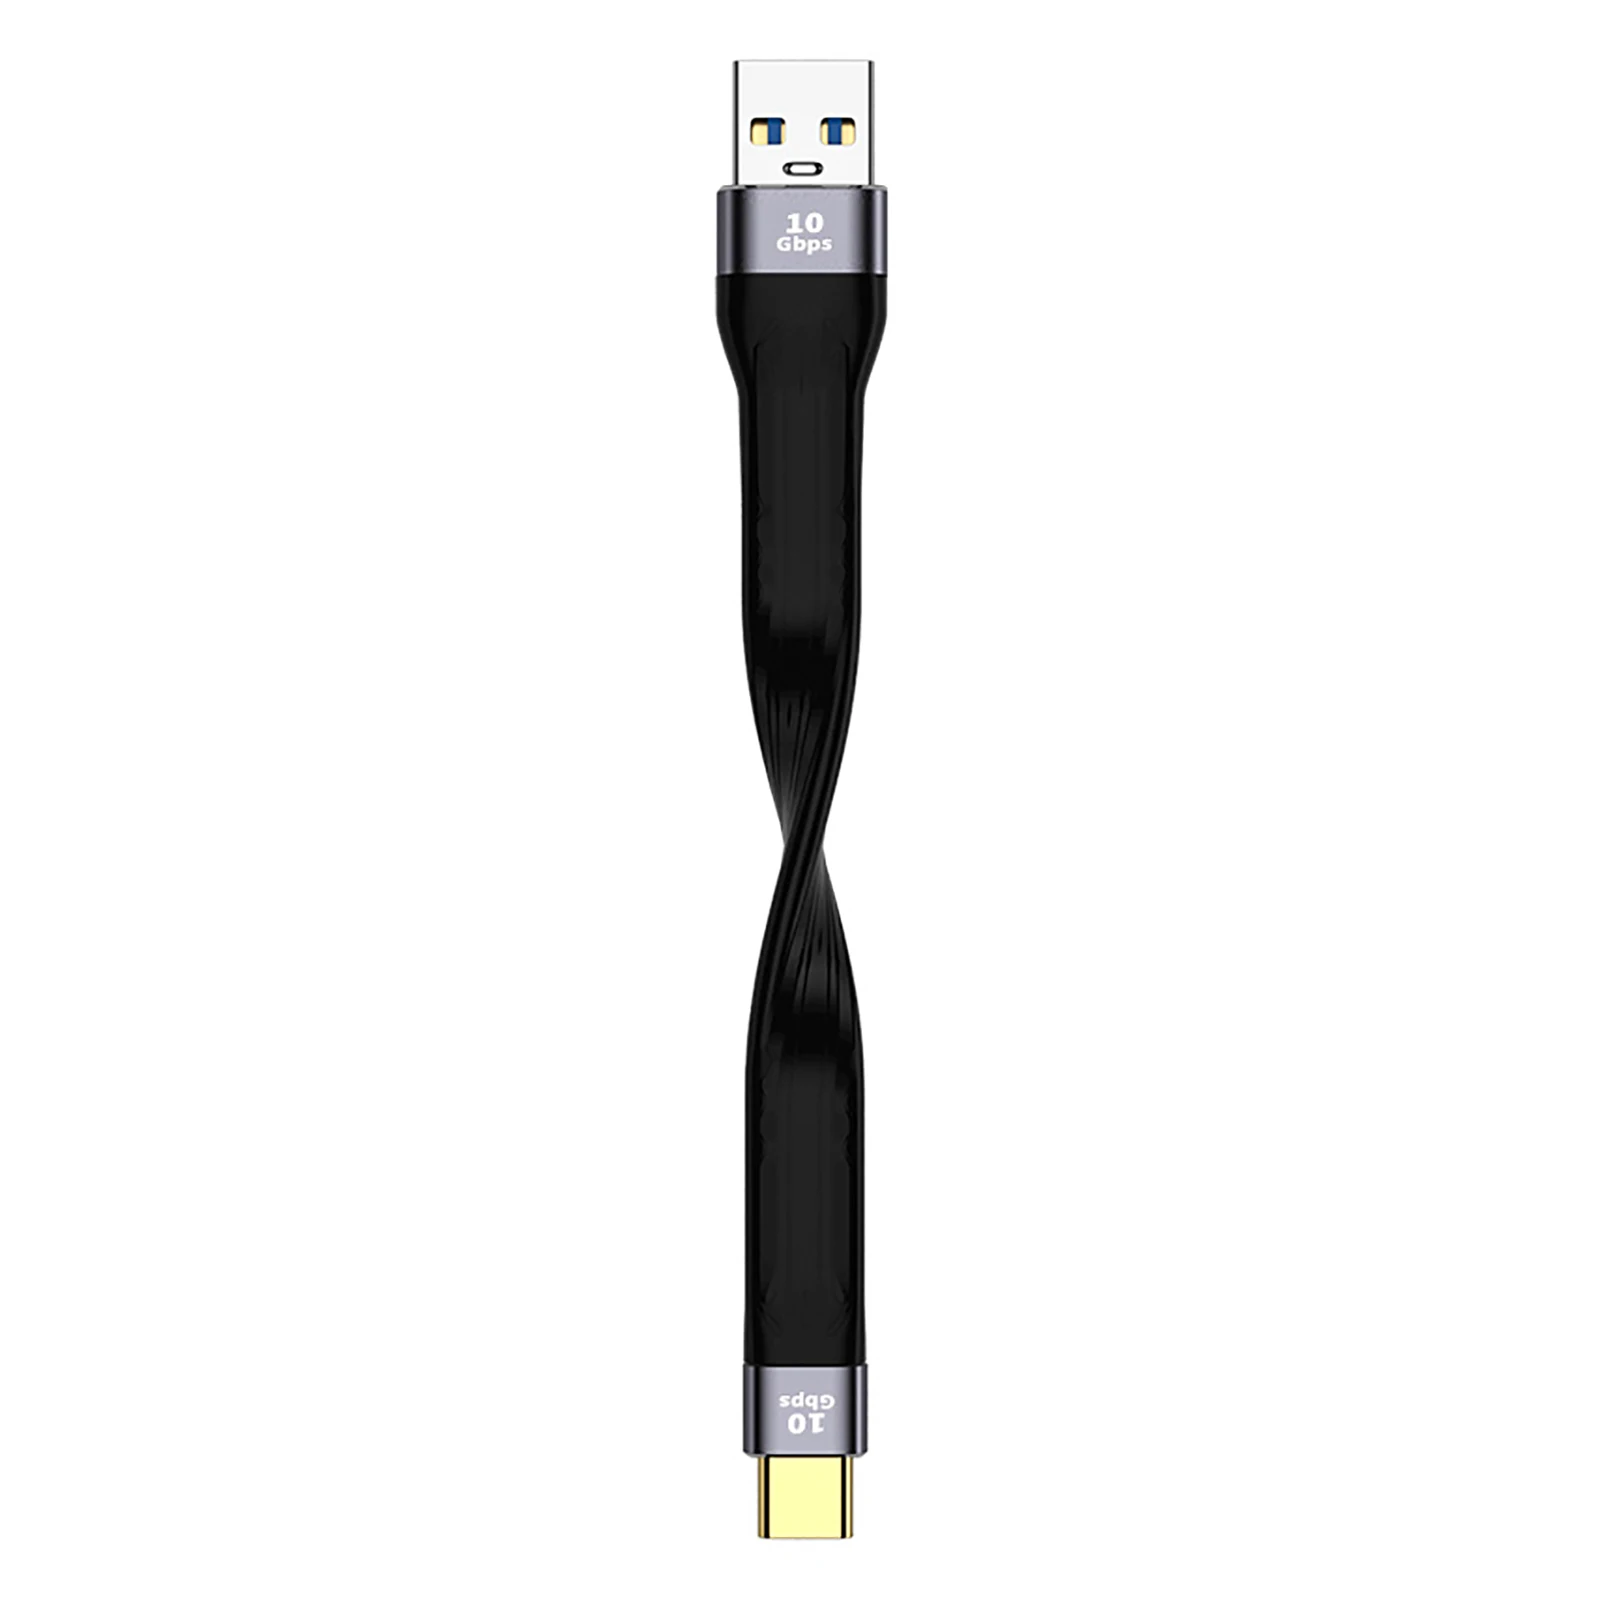 

Type C USB3.1 Gen2 Cable Short Fast Charging Cable Cord For Samsung Xiao Mi Hua Wei Android Phone 10Gbps Data Cord USB Cable